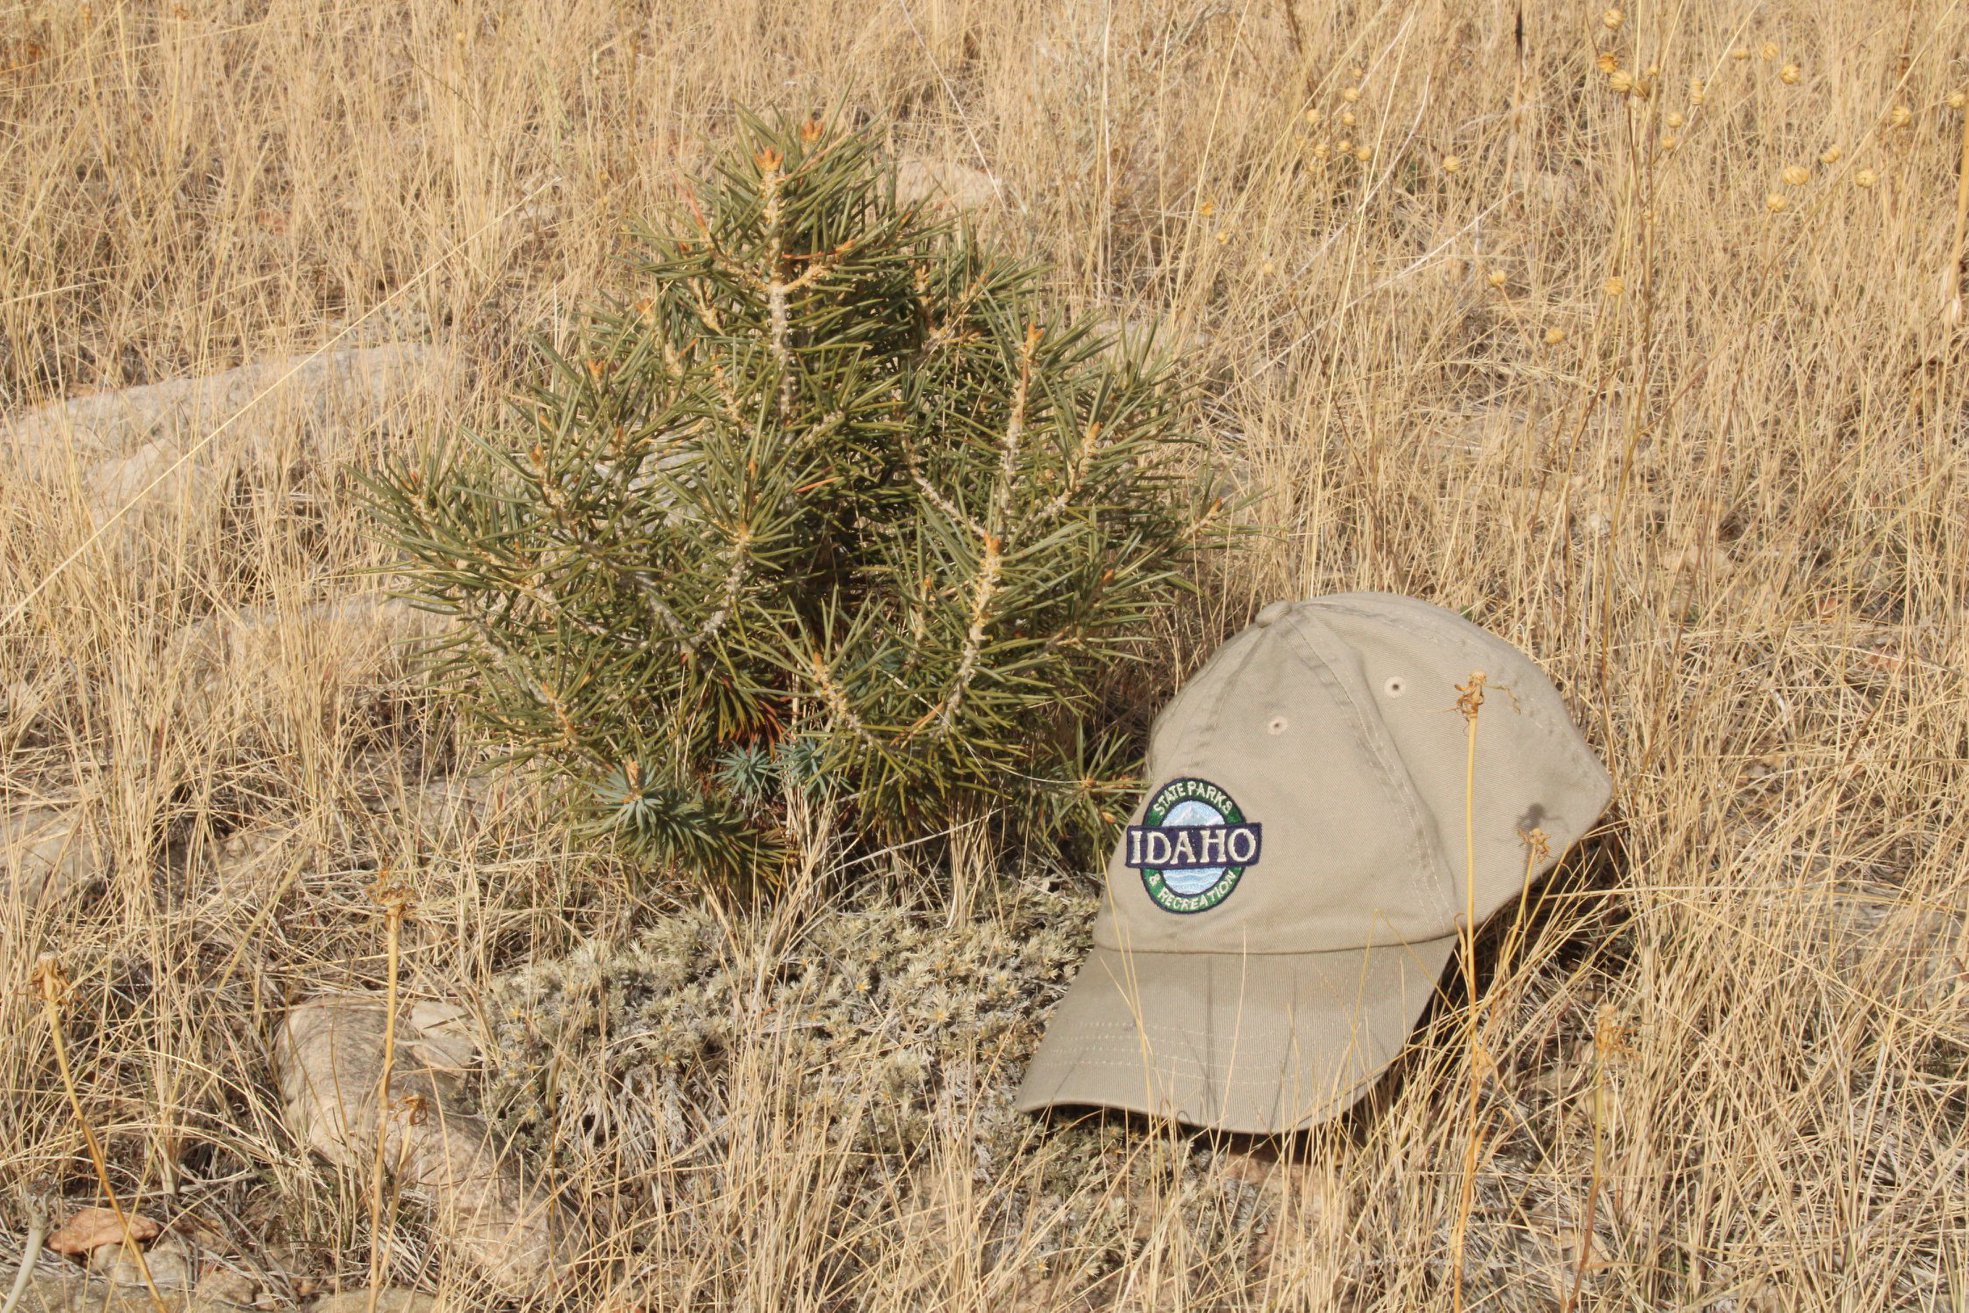 Pinyon seedling with a hat sitting next to it.